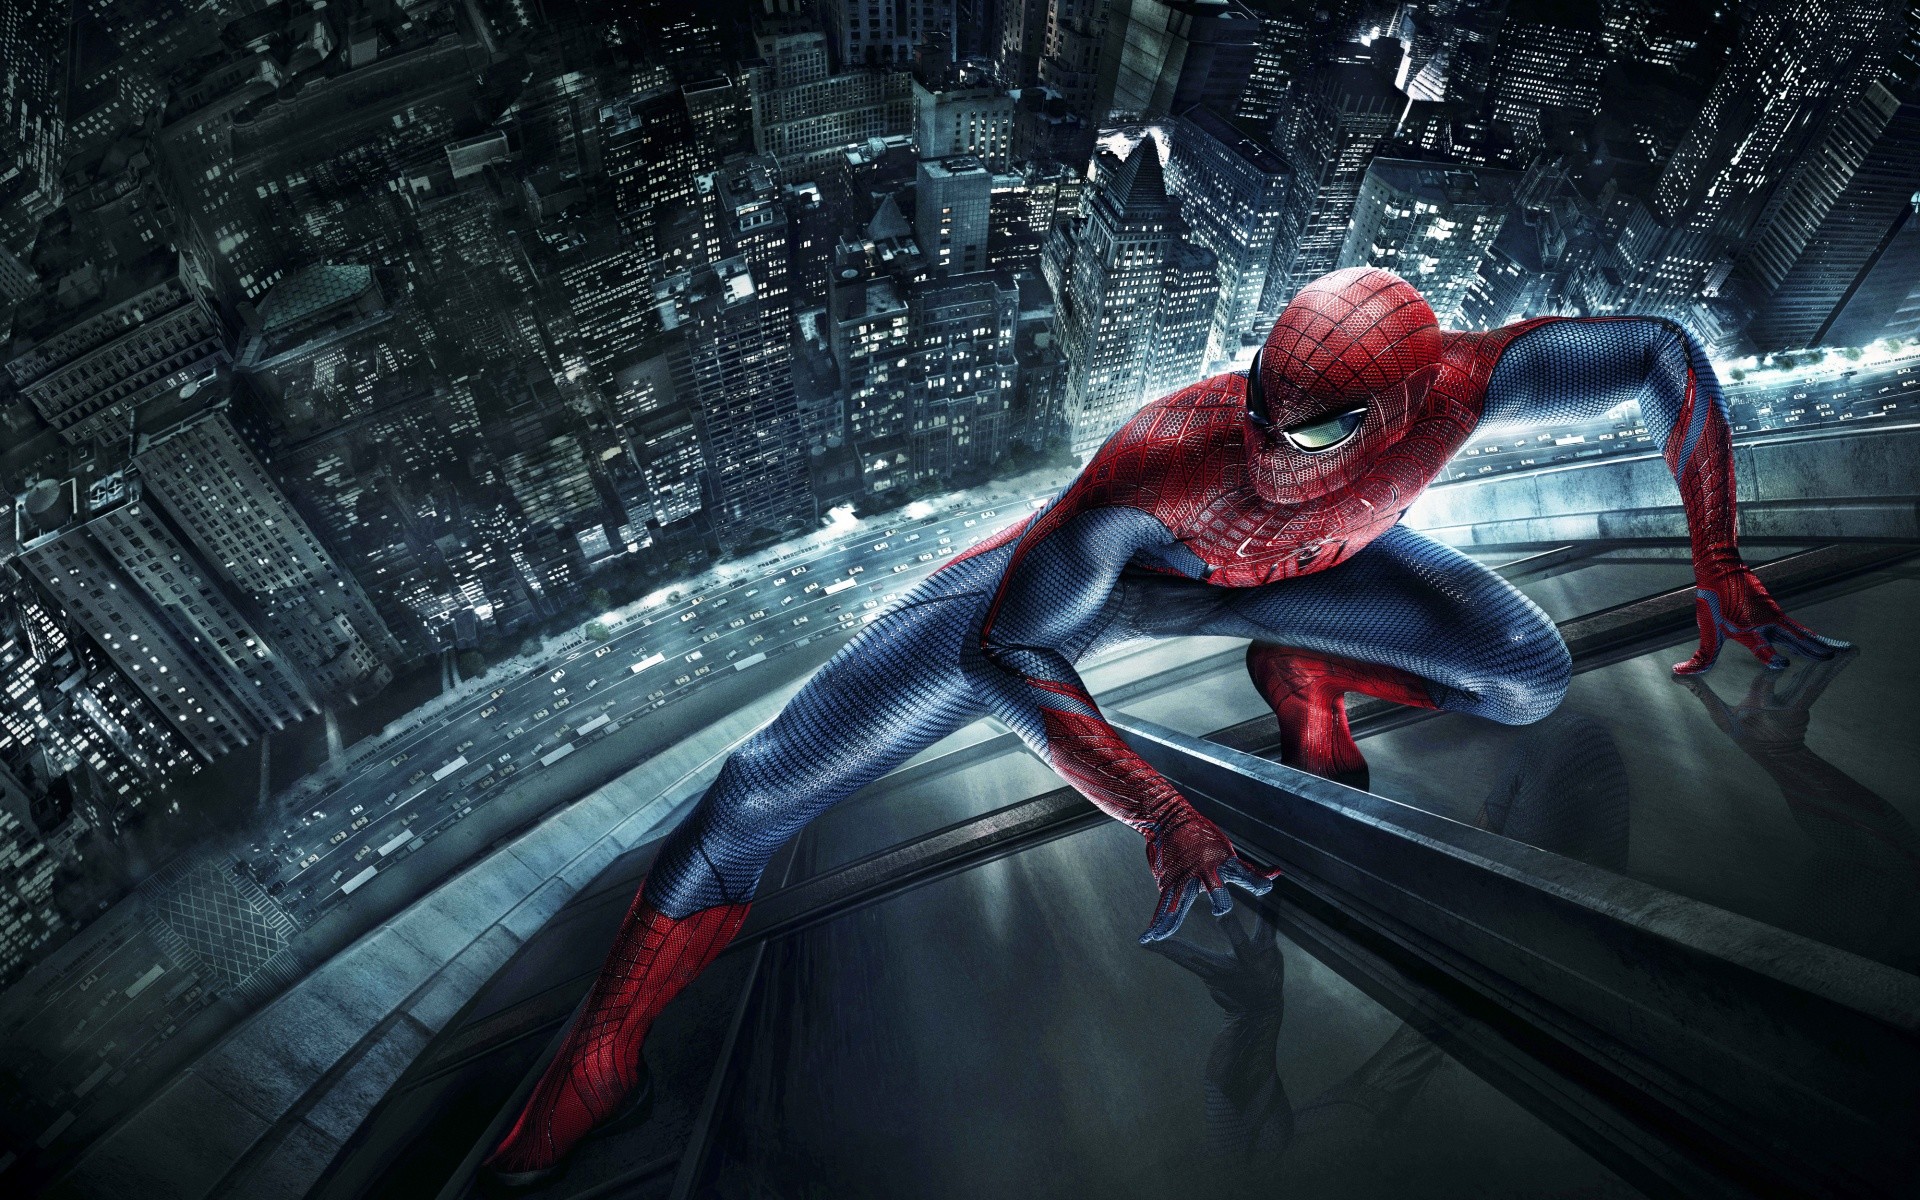 1920x1200 The Amazing Spider Man Movie 3 wallpaper from Dark wallpapers